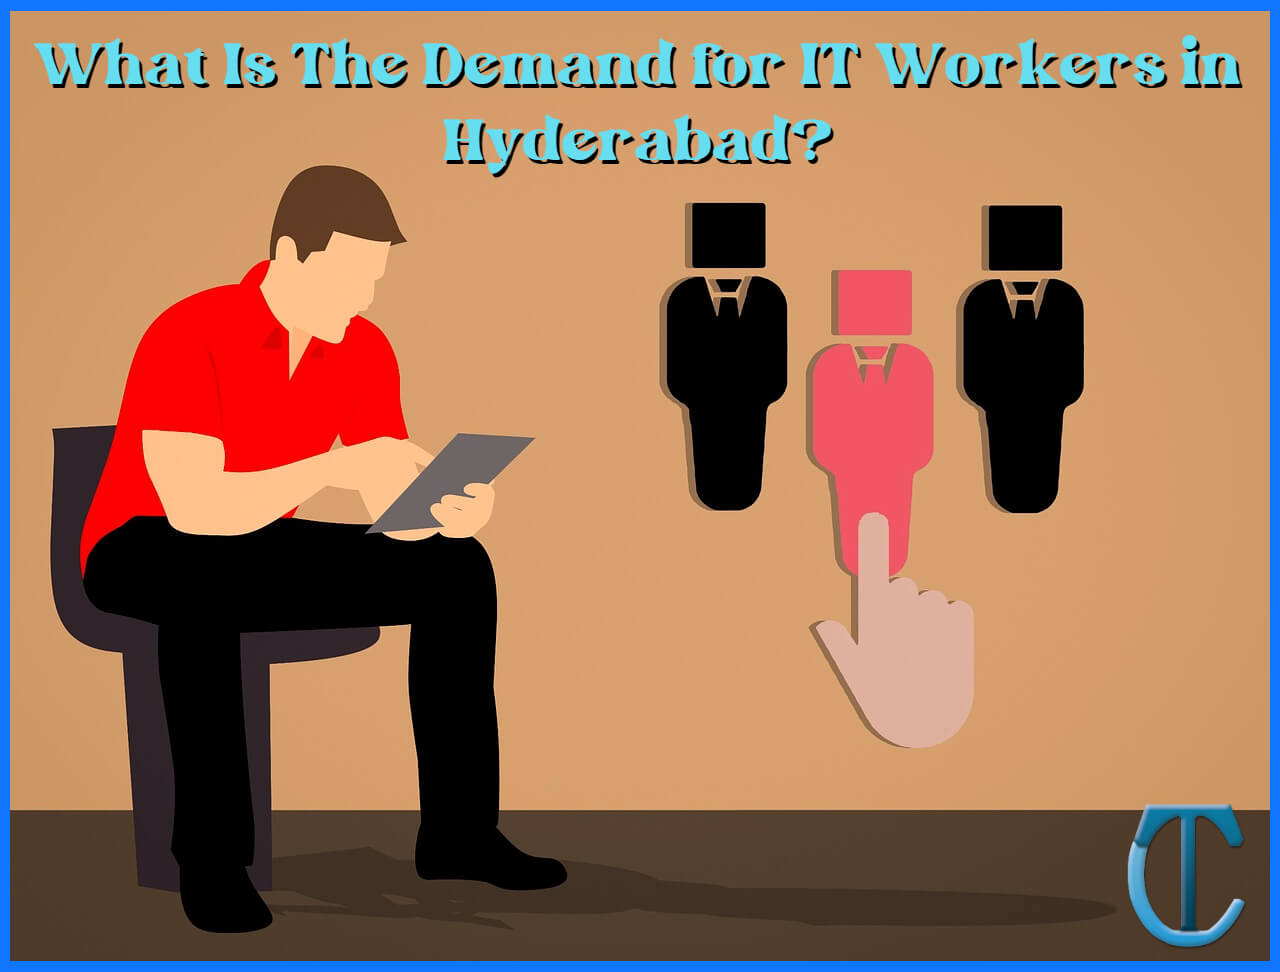 What Is The Demand for IT Workers in Hyderabad